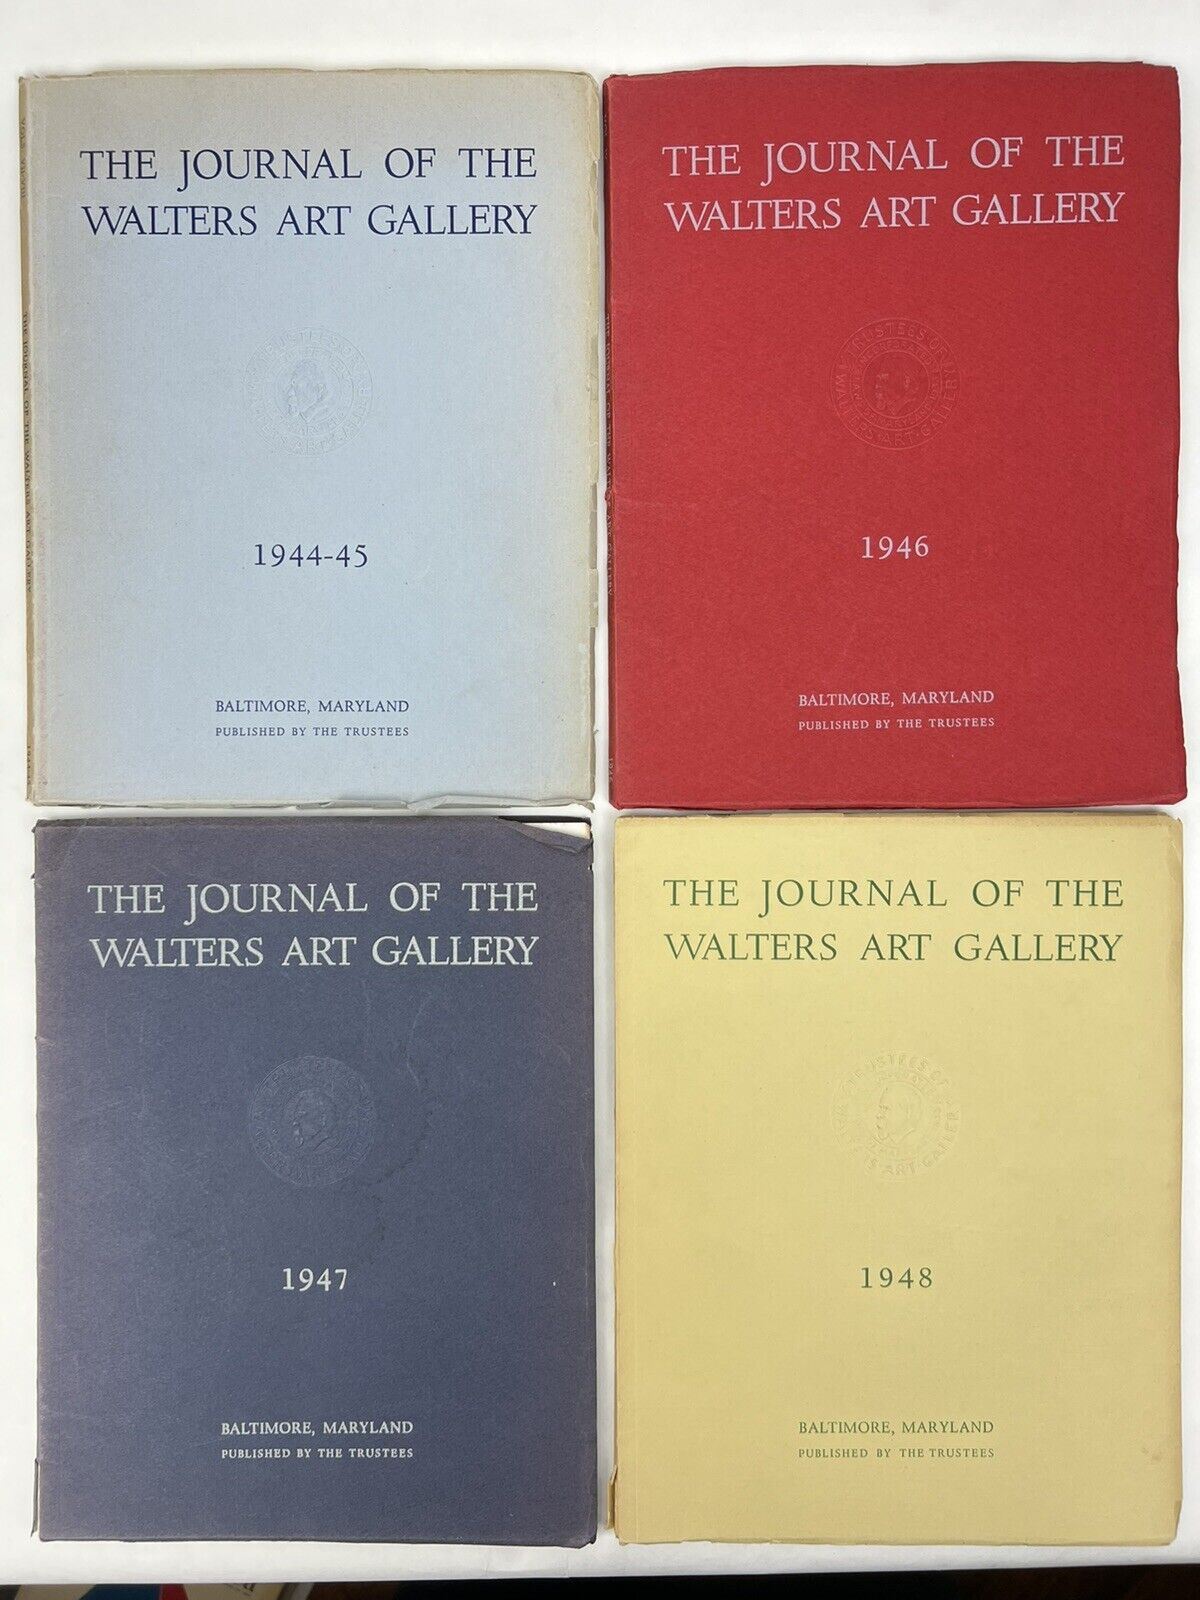 12 Vols JOURNAL OF THE WALTERS ART GALLERY 1939-1955 VINTAGE CATALOGUE BULLETIN